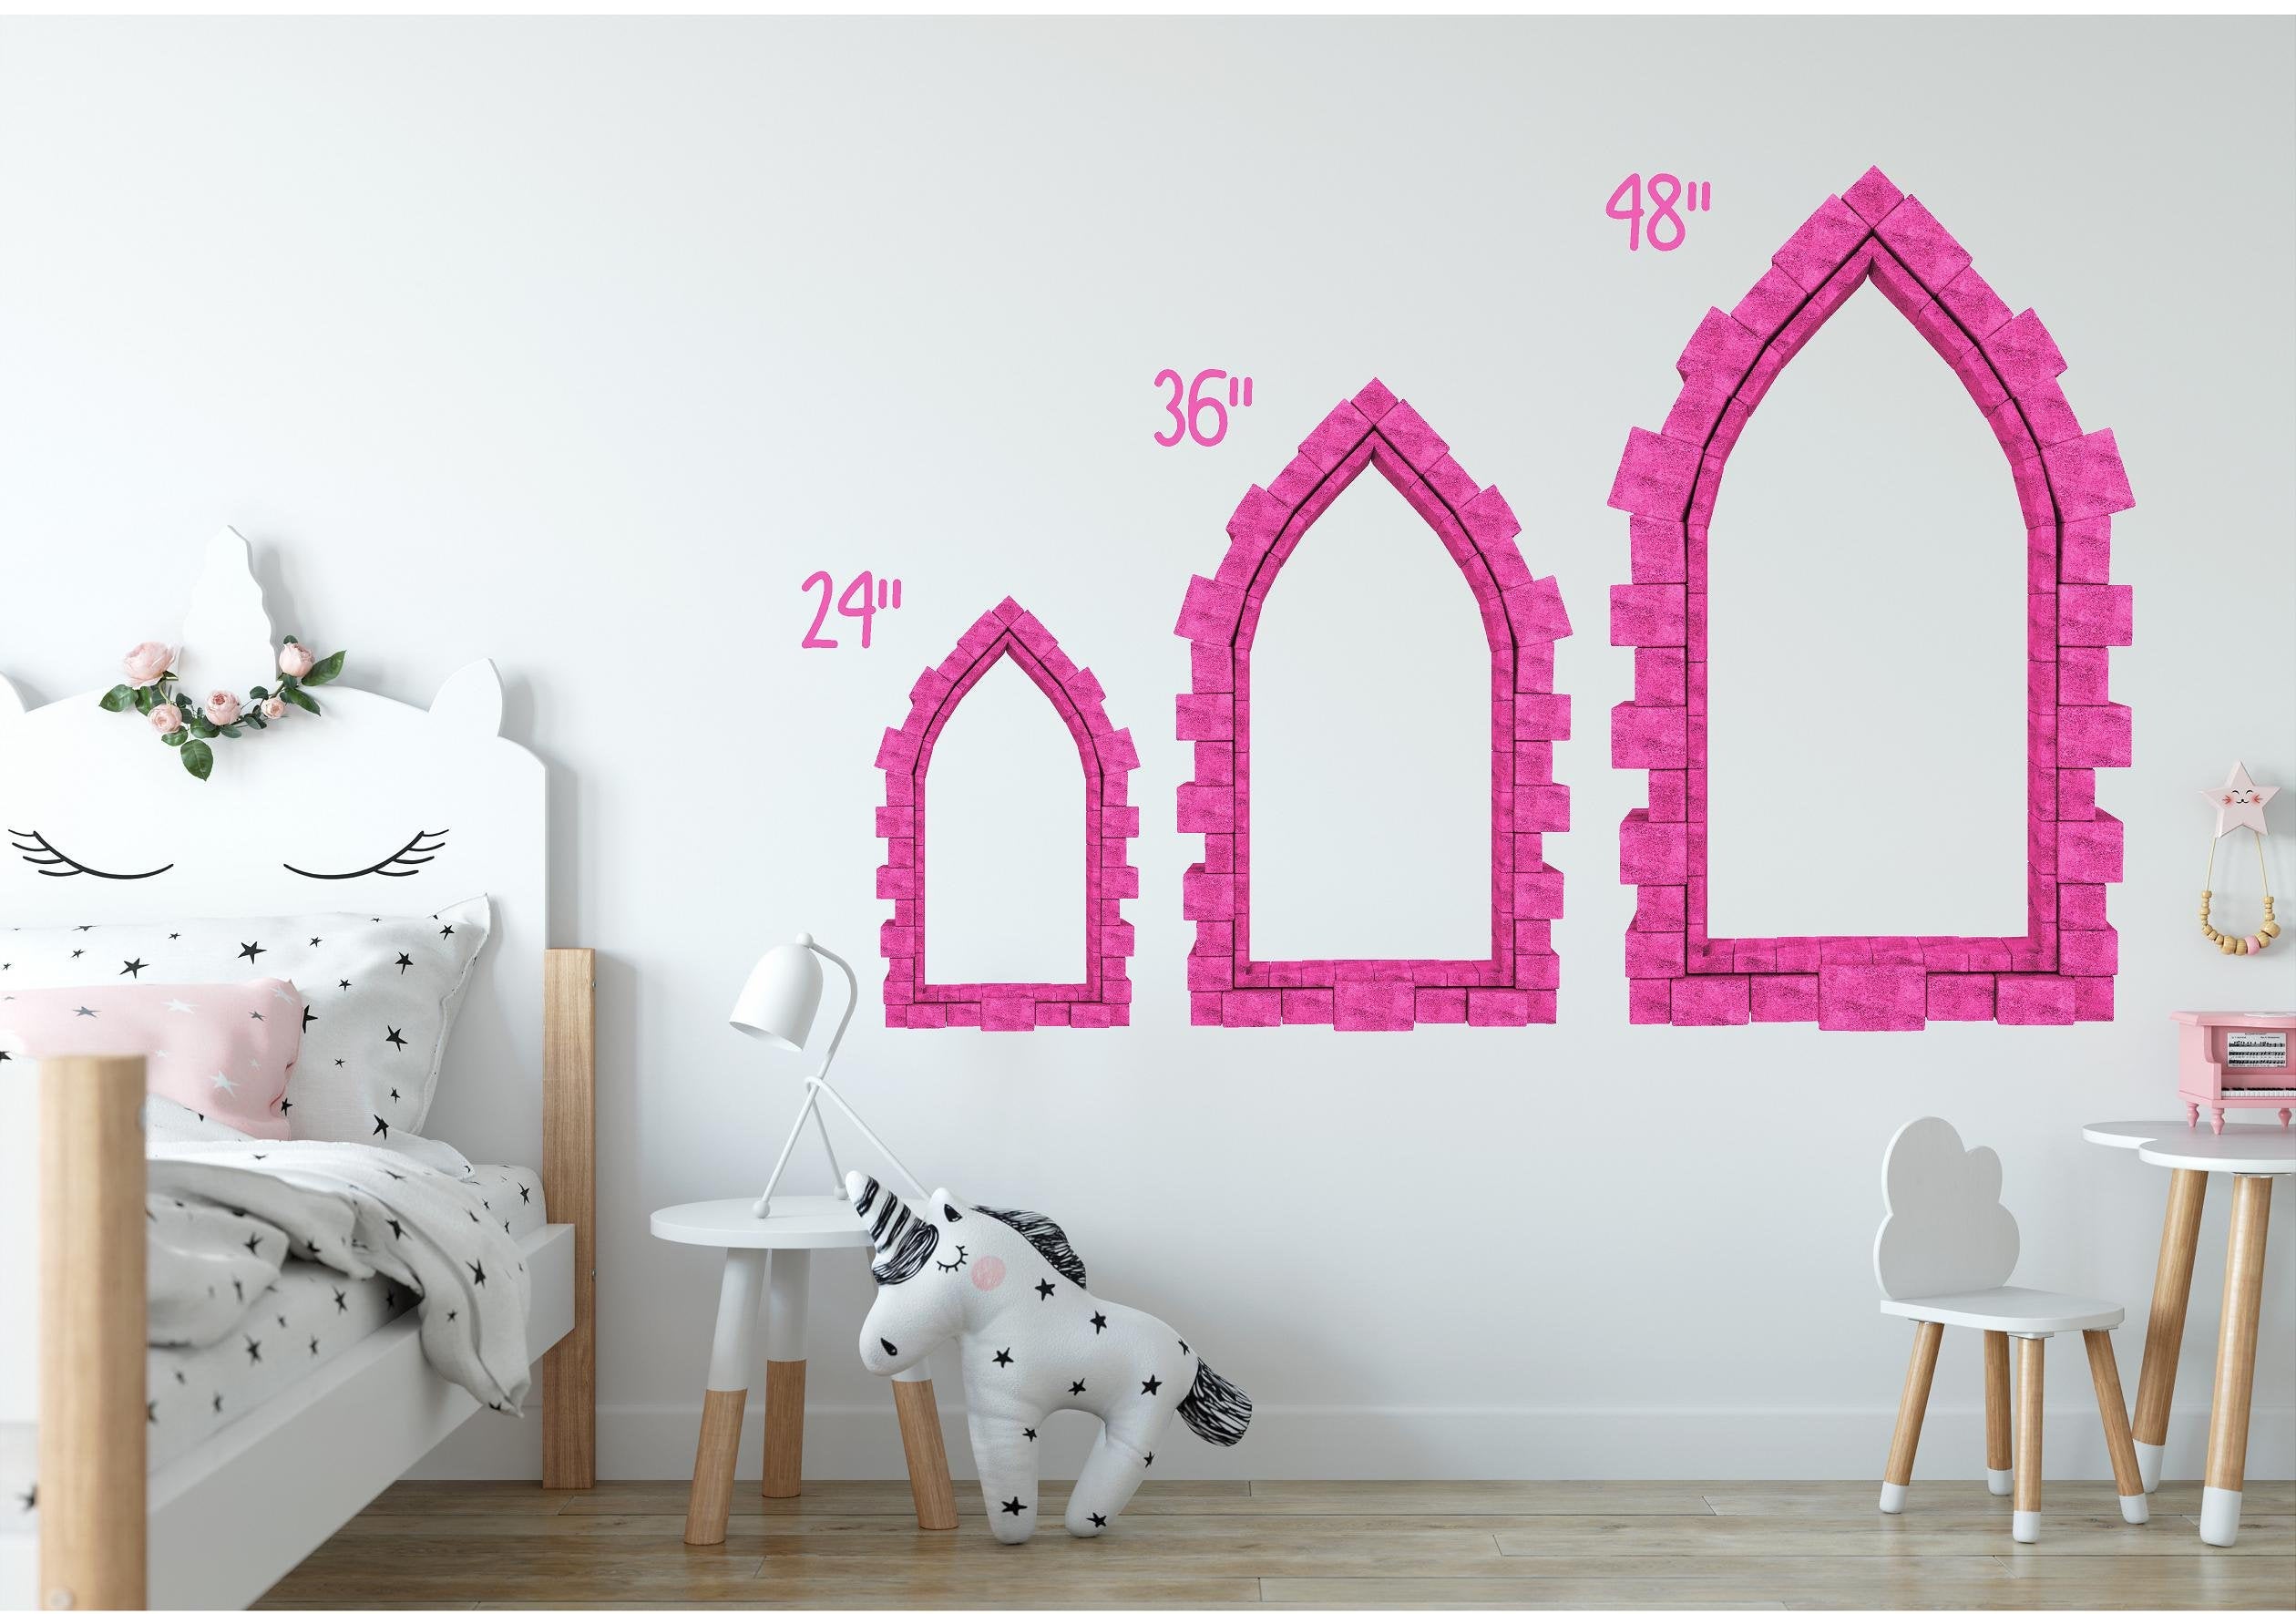 3D Castle Window Rapunzel's Castle Tower Wall Decal Princess Removable Fabric Vinyl Wall Sticker | DecalBaby